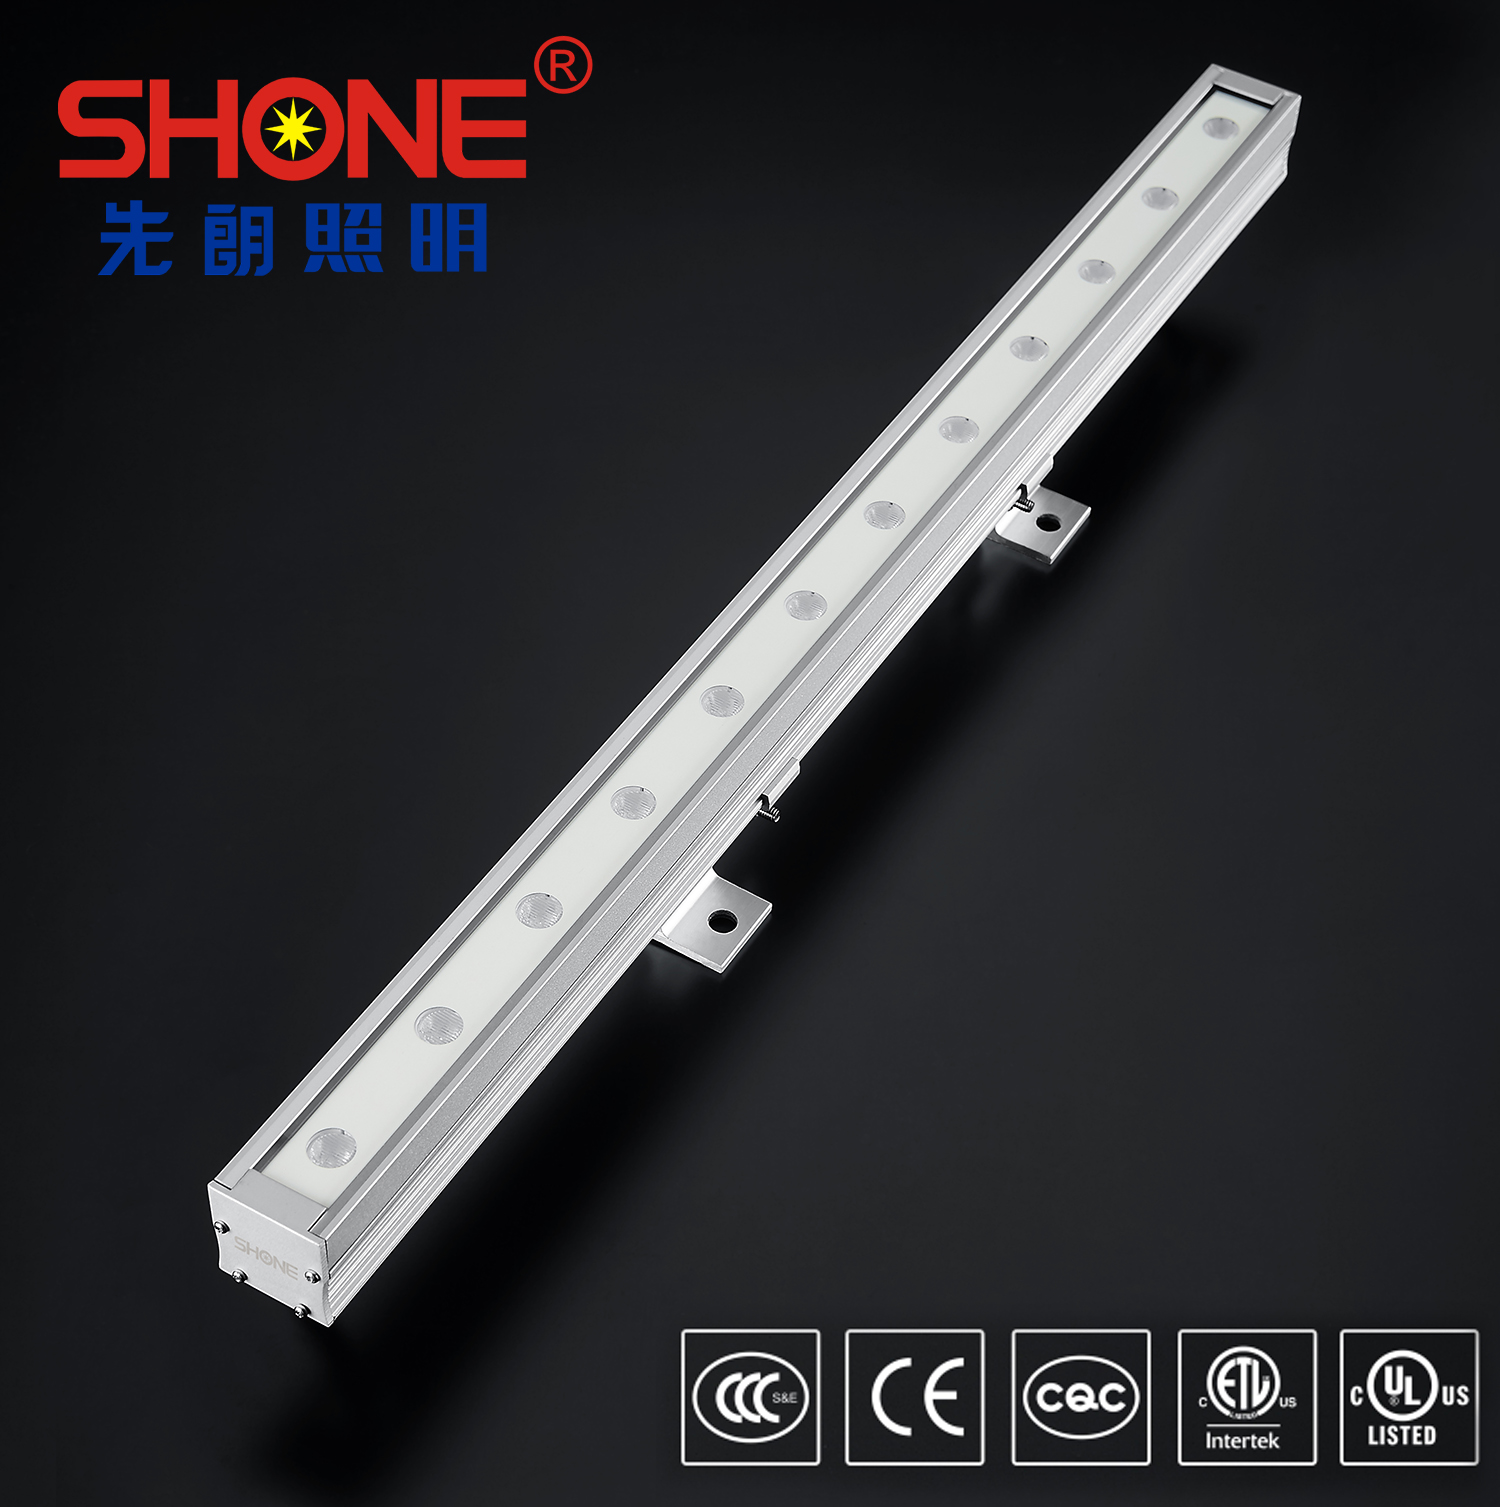 Shone Lighting 30x30 LED Linear Light Wall Washer with CE ETL Certificate IP66 for Outdoor Lightin